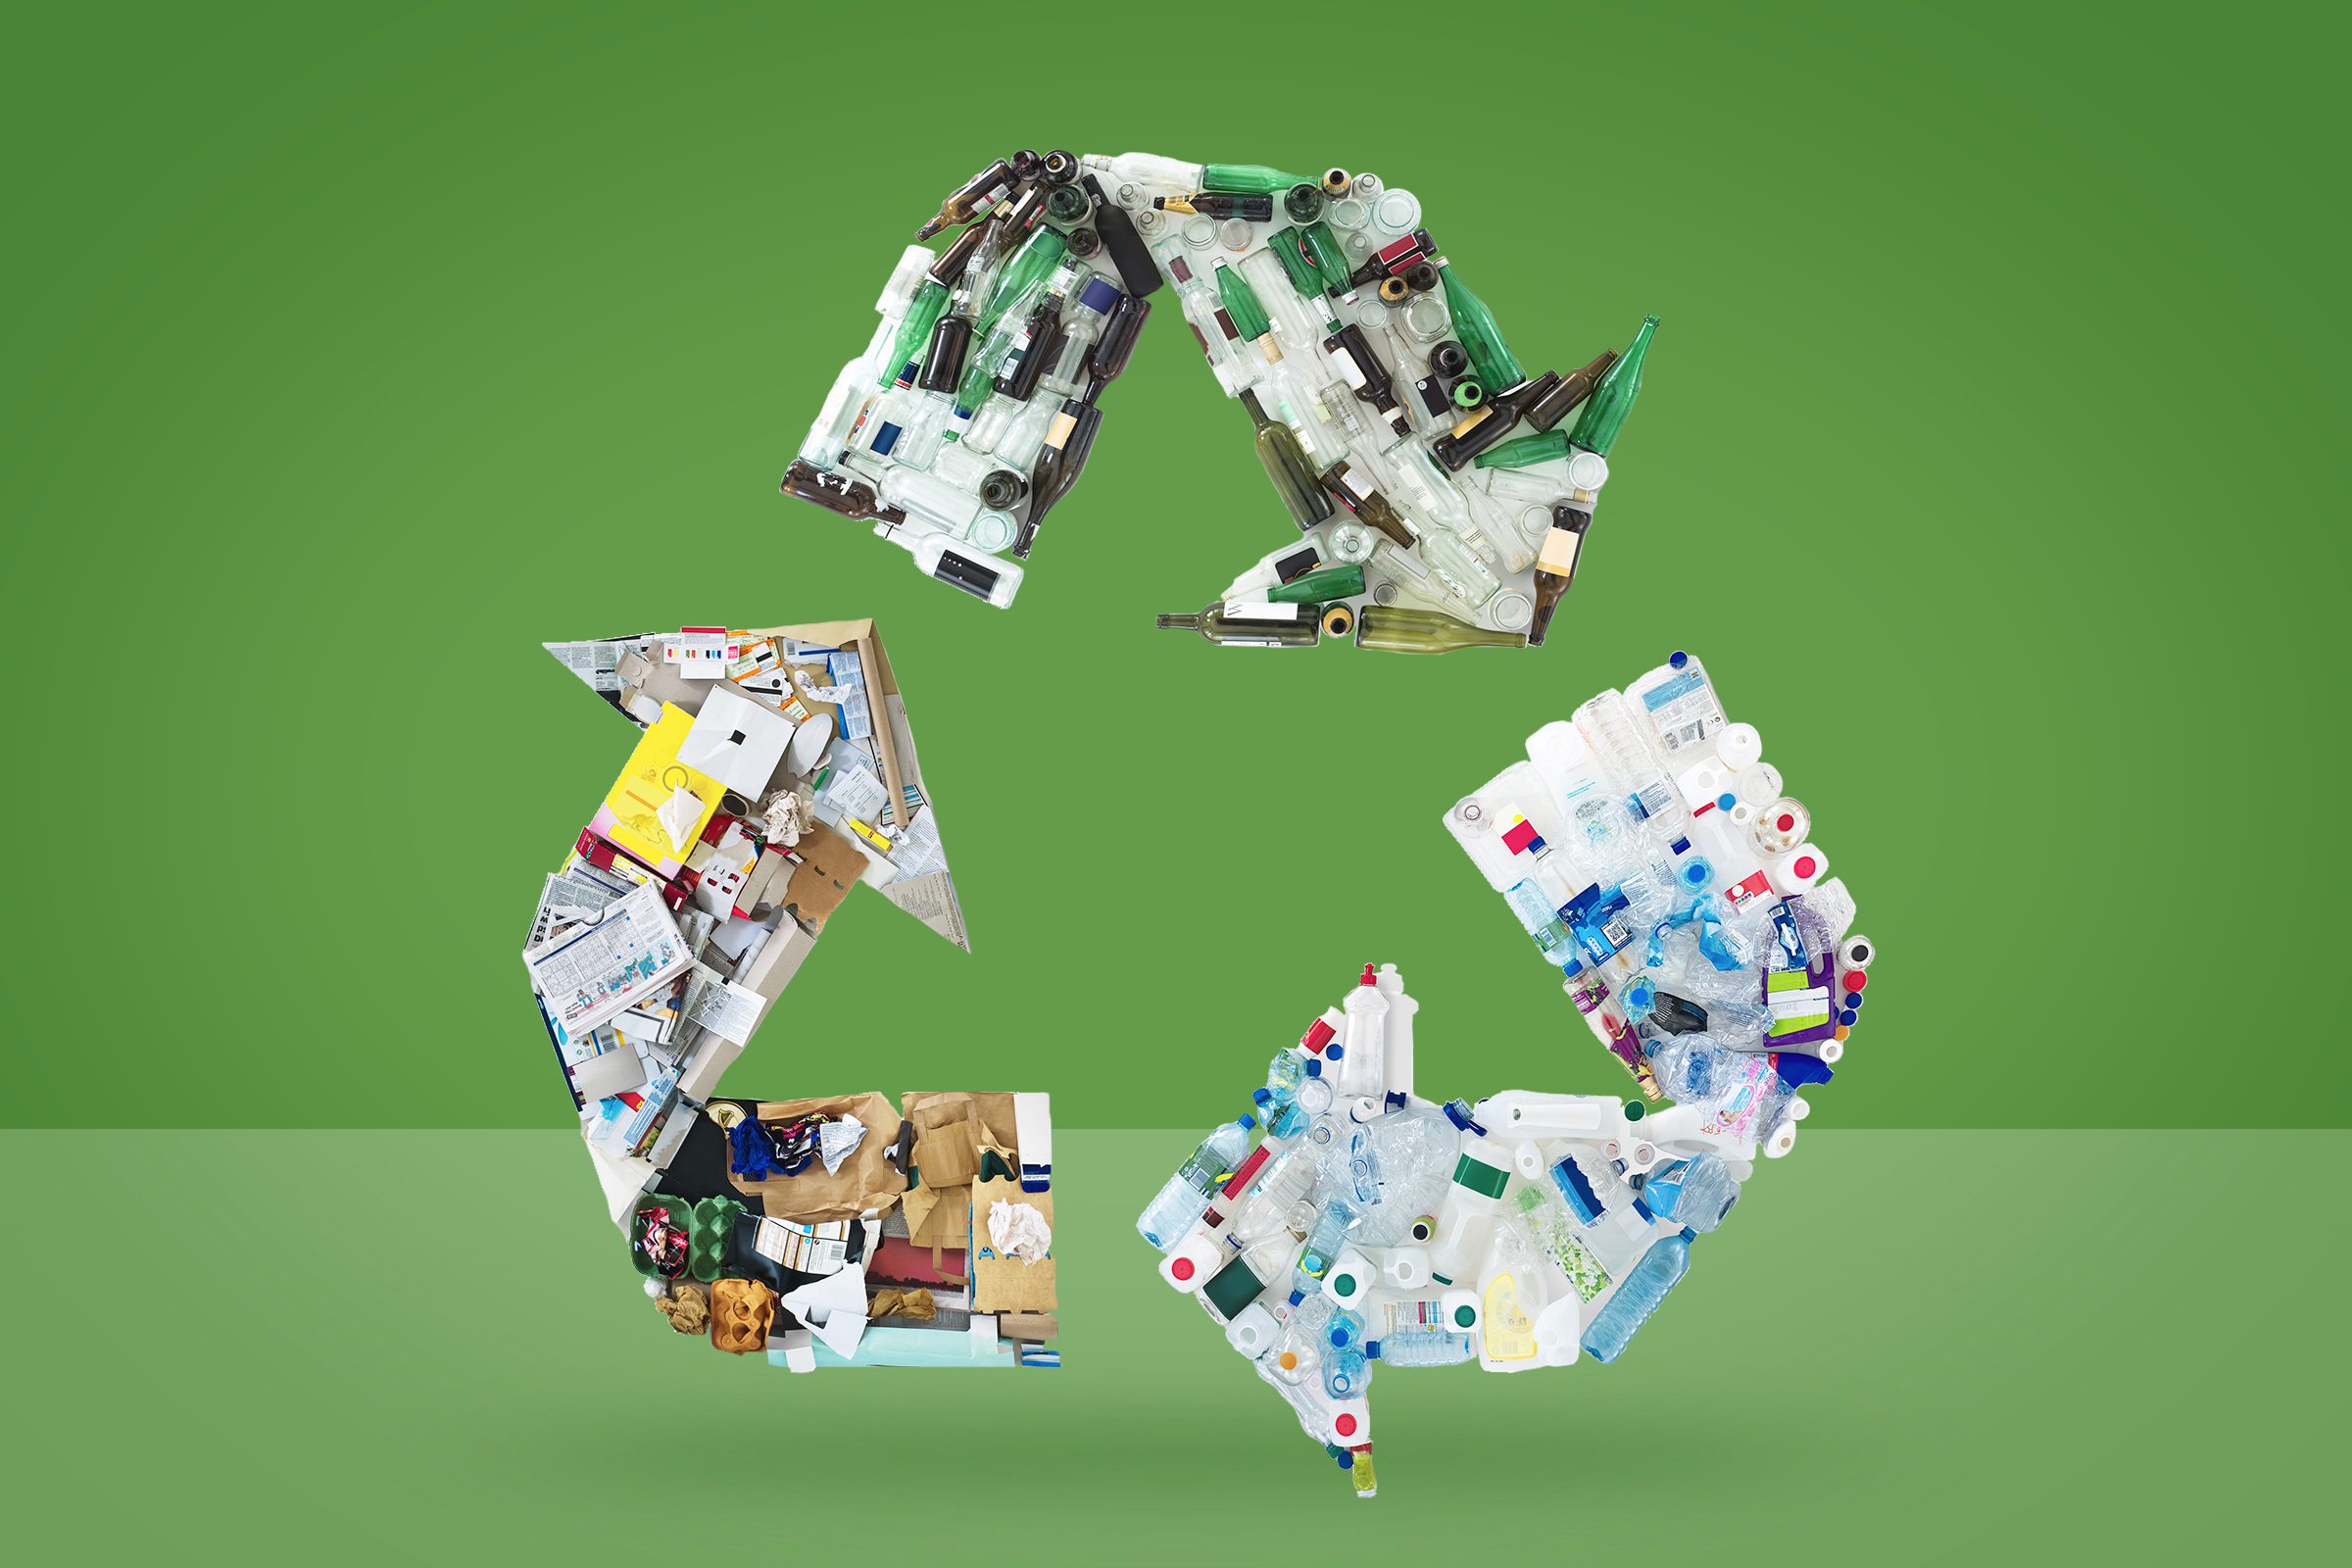 https://www.rd.com/wp-content/uploads/2022/06/The-Future-of-Recycling-FT-GettyImages-88962095.jpg